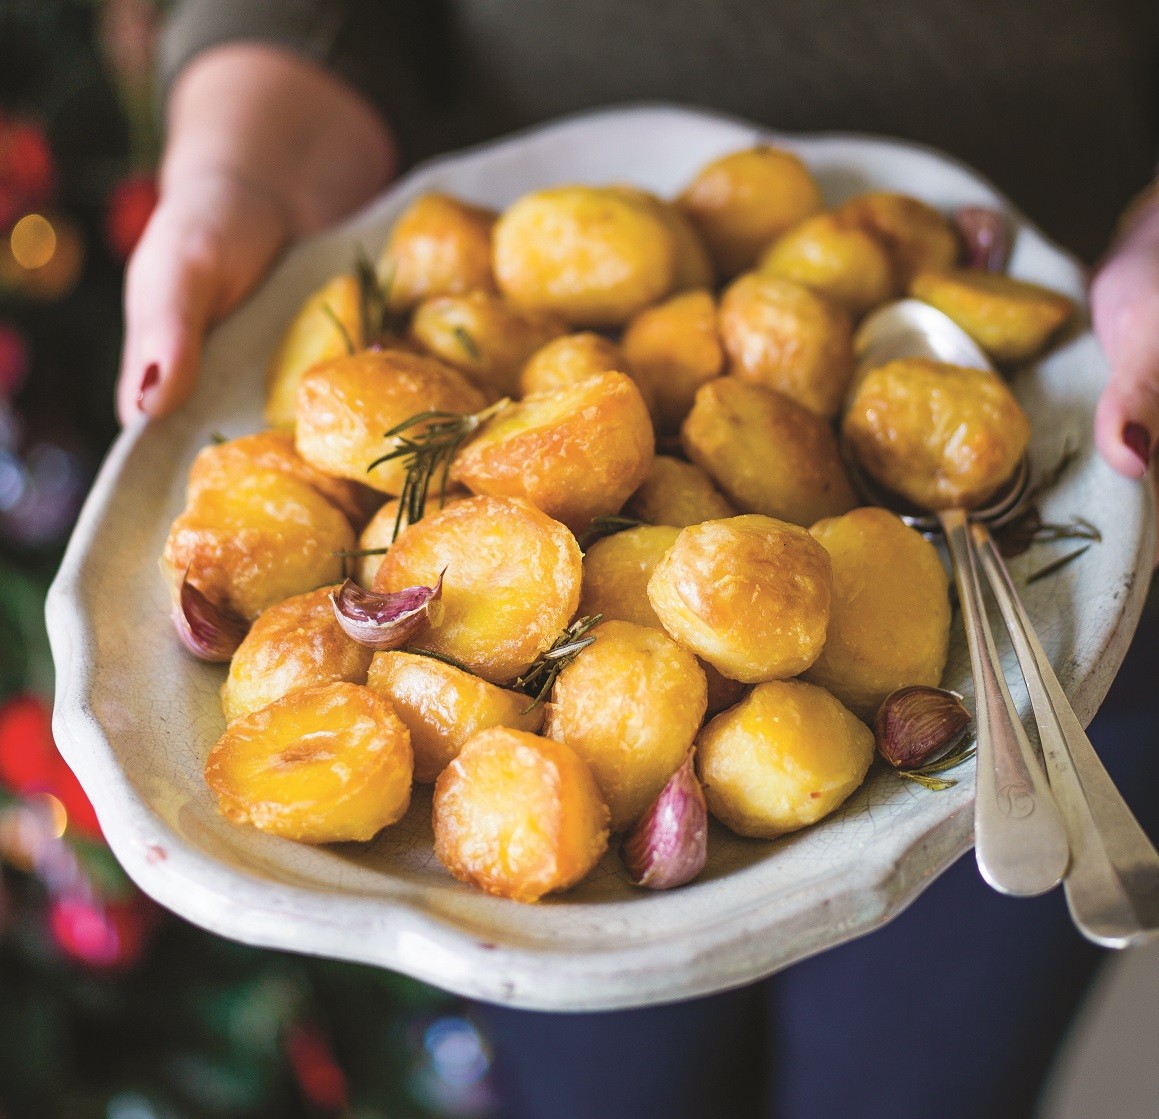 OLIVE’S ULTIMATE CHRISTMAS DINNERCHAROTTE’S GARLIC AND ROSEMARY ROASTIES